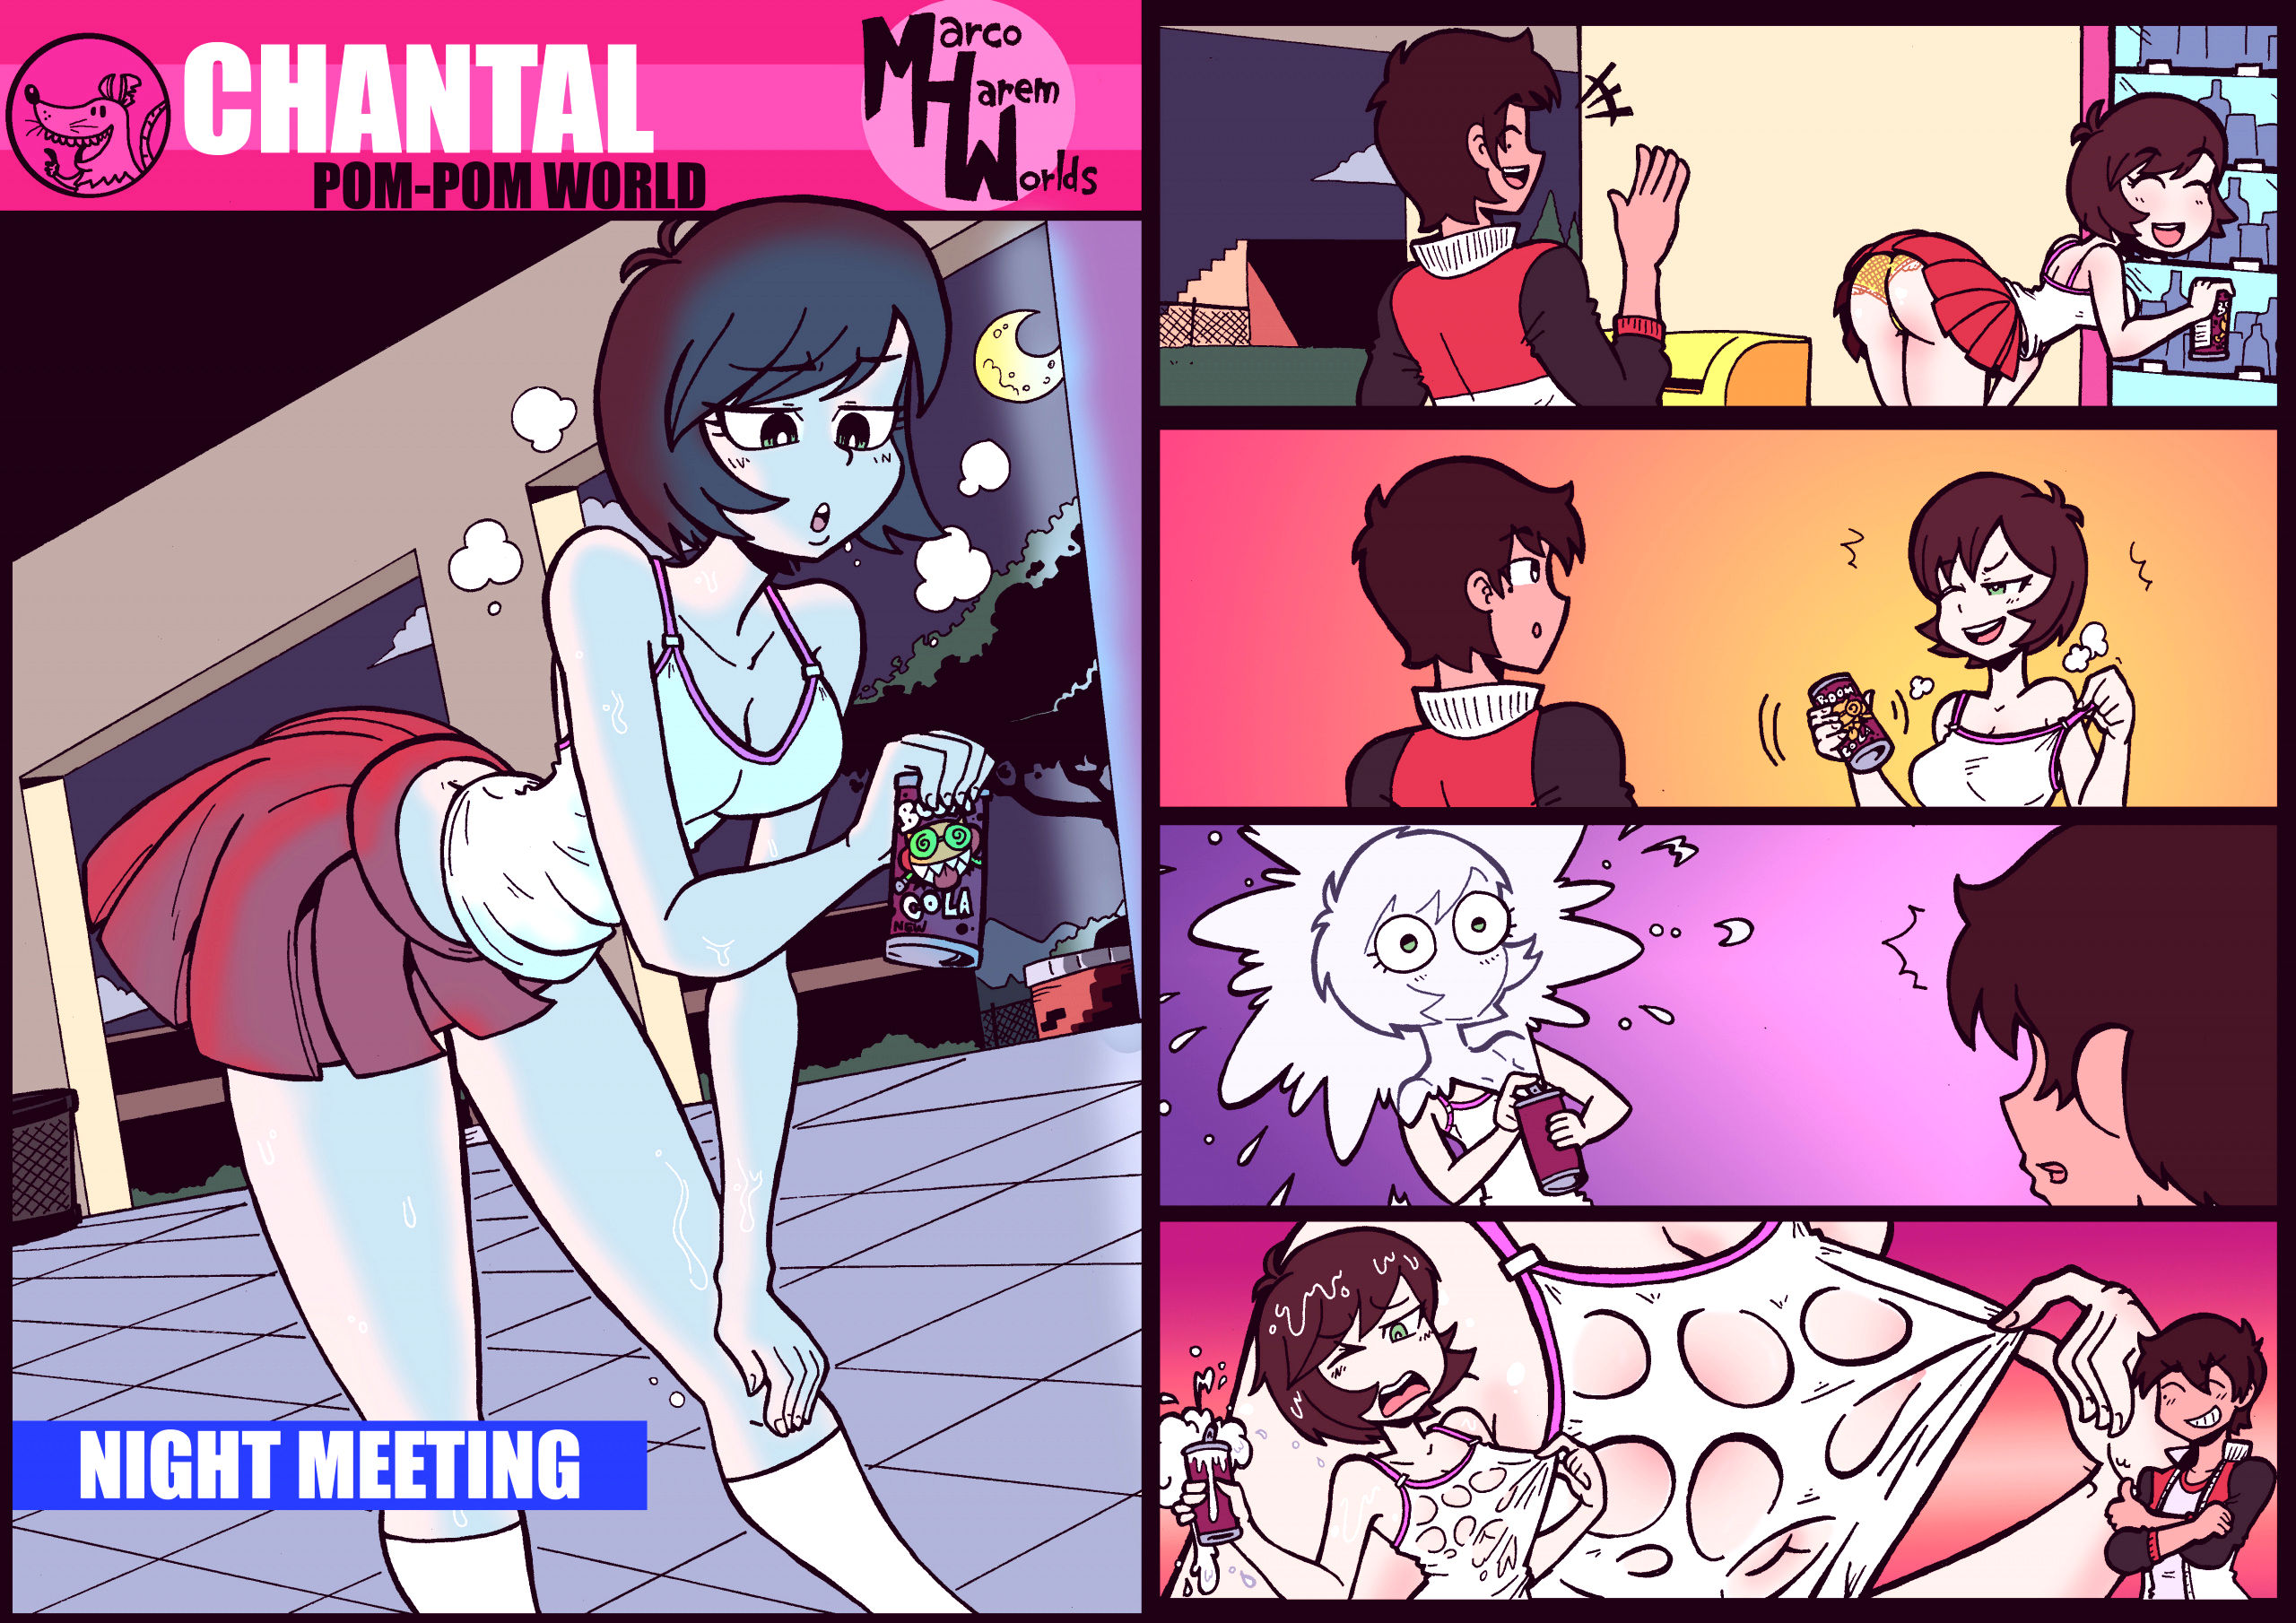 Marco harem worlds porn comic picture 13